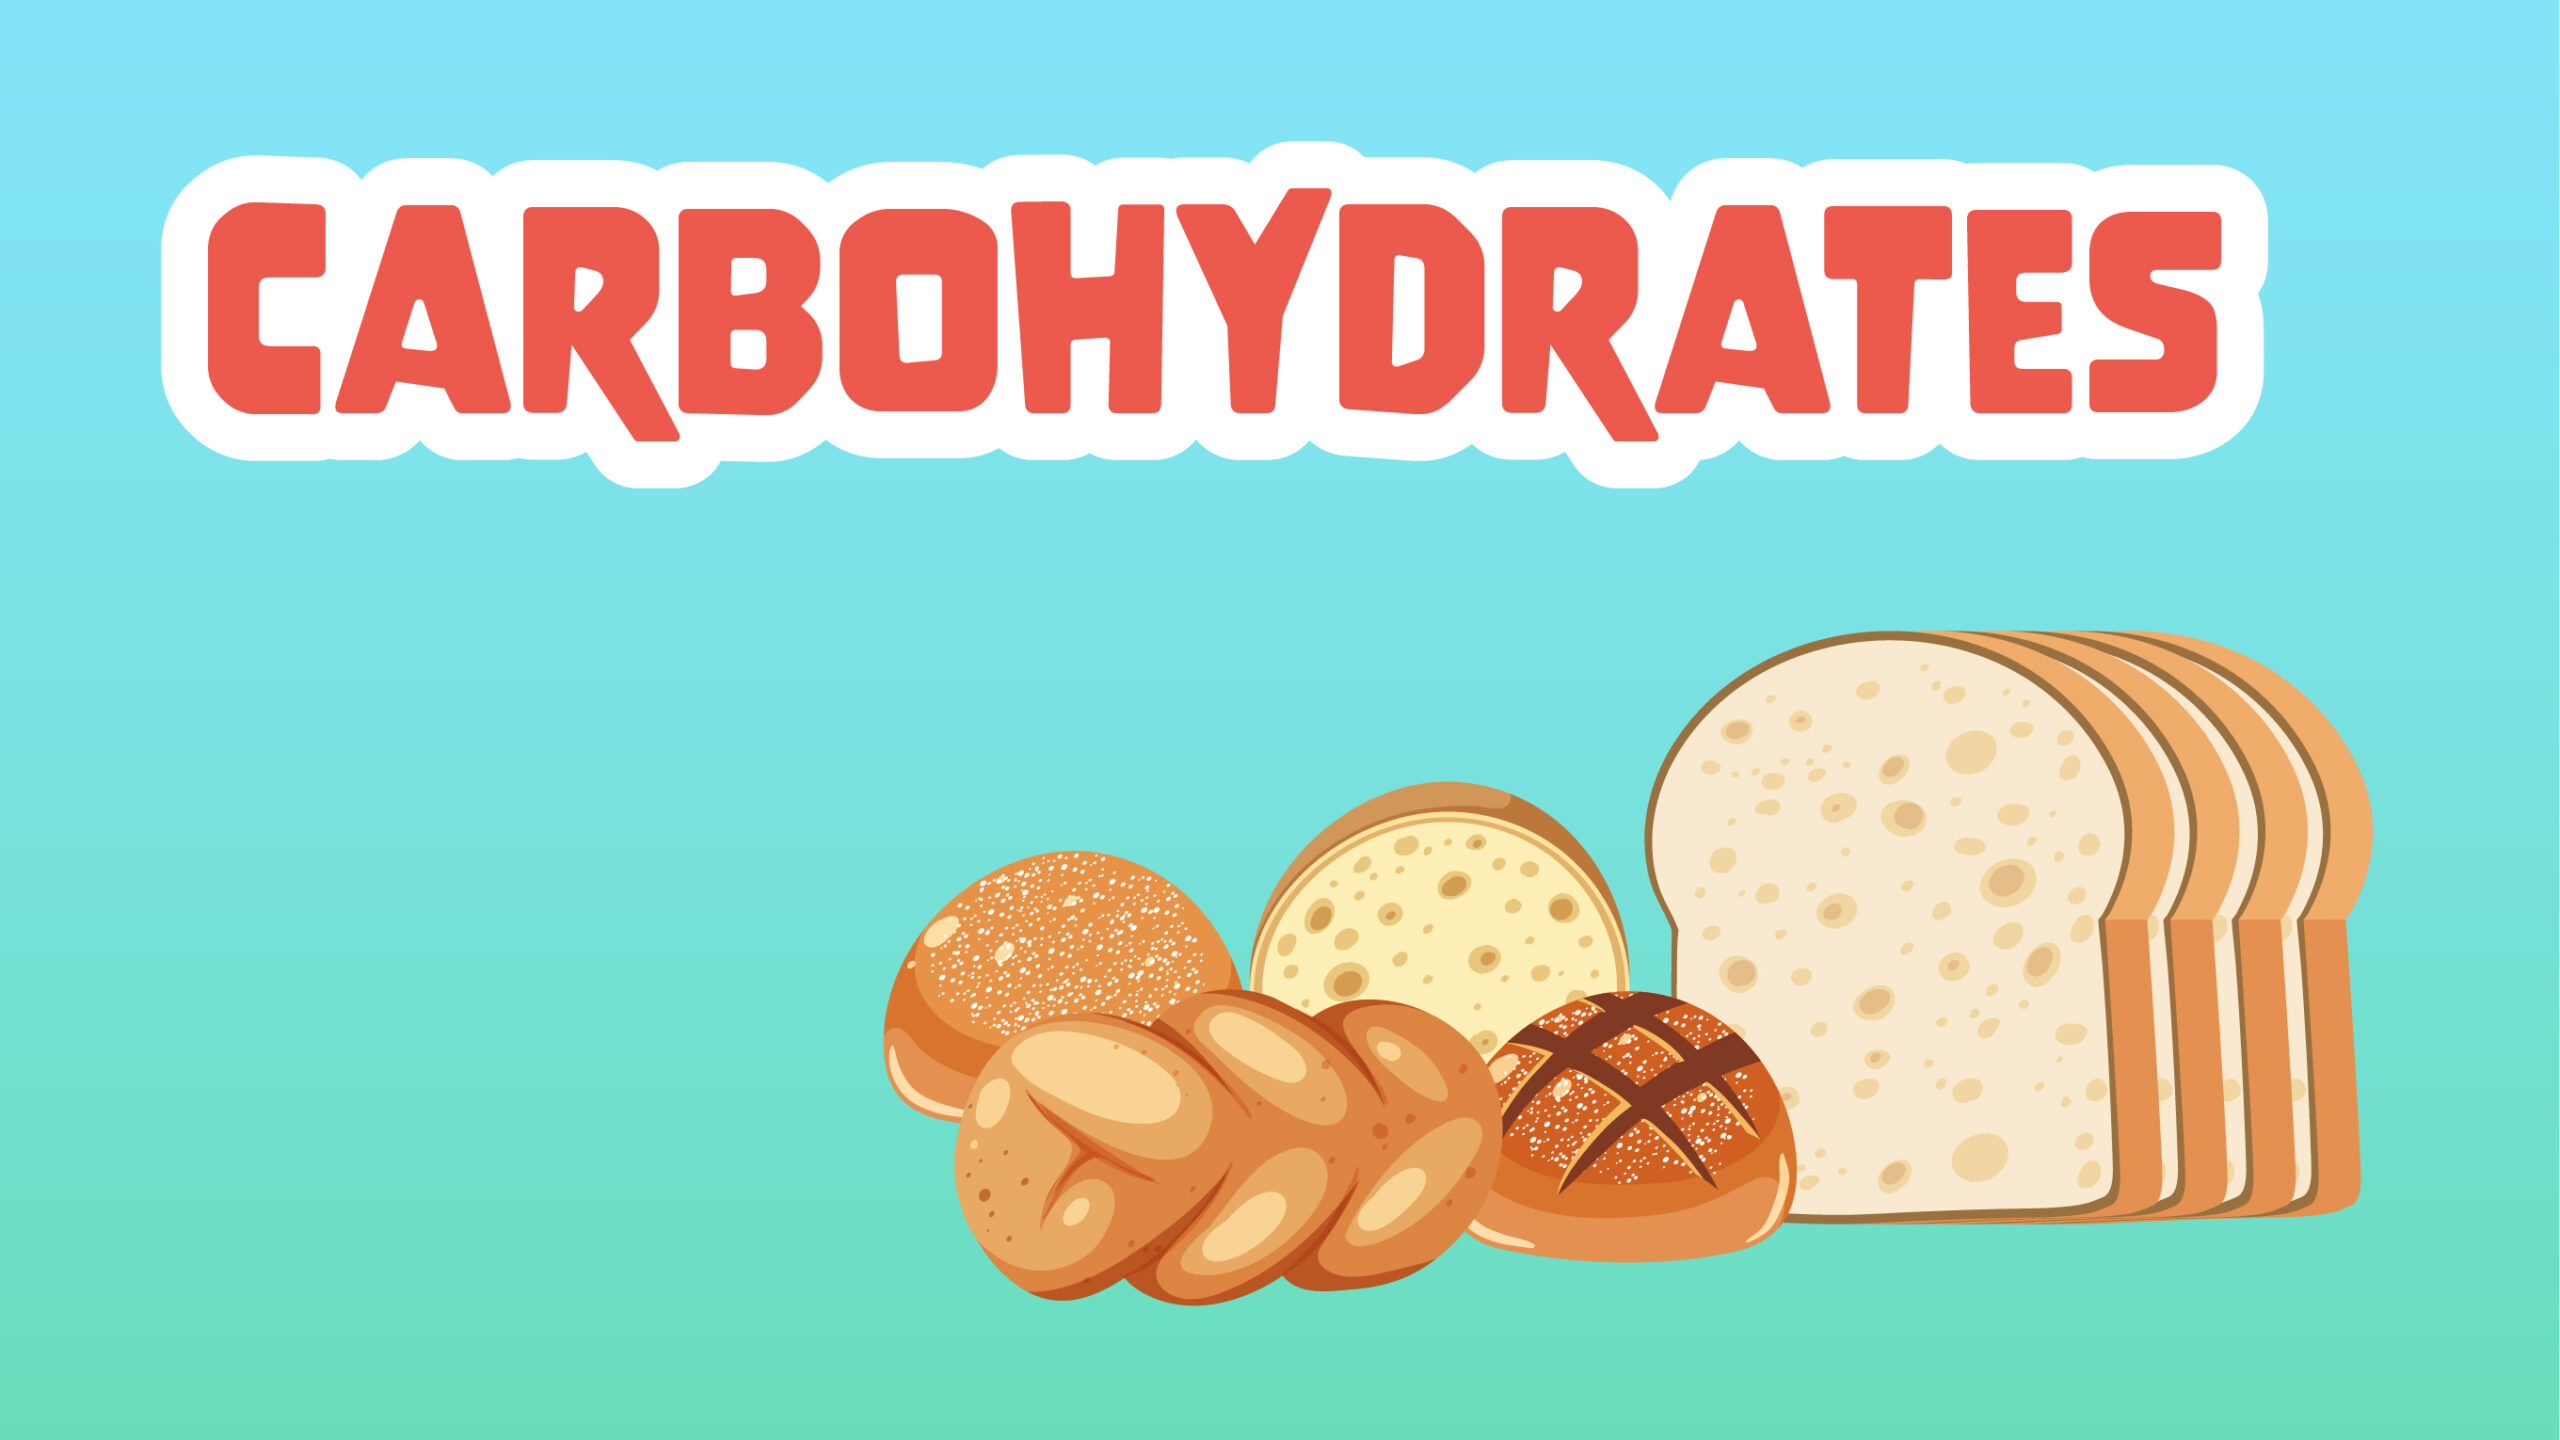 Carbohydrates Facts for Kids – 5 Cool facts about Carbohydrates